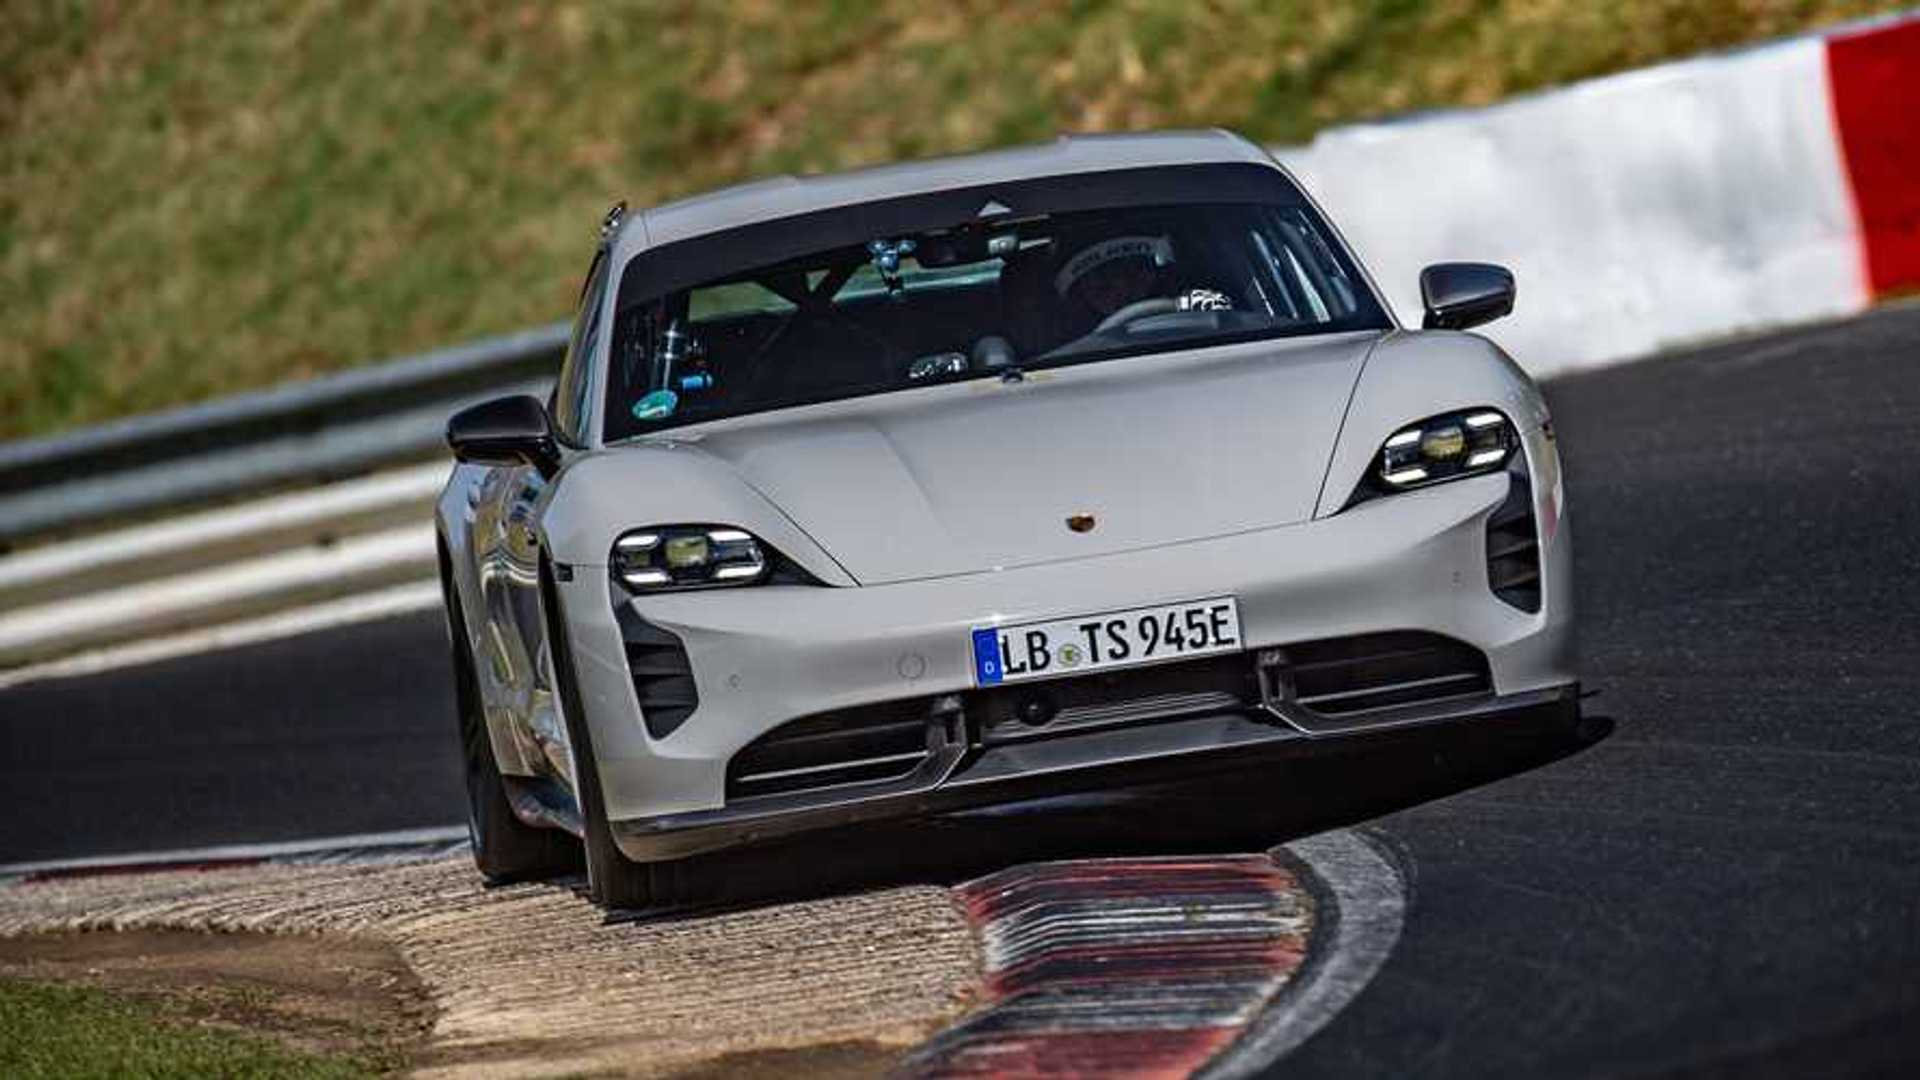 buyers of new porsche taycan evs face wait times of 6 to 9 months